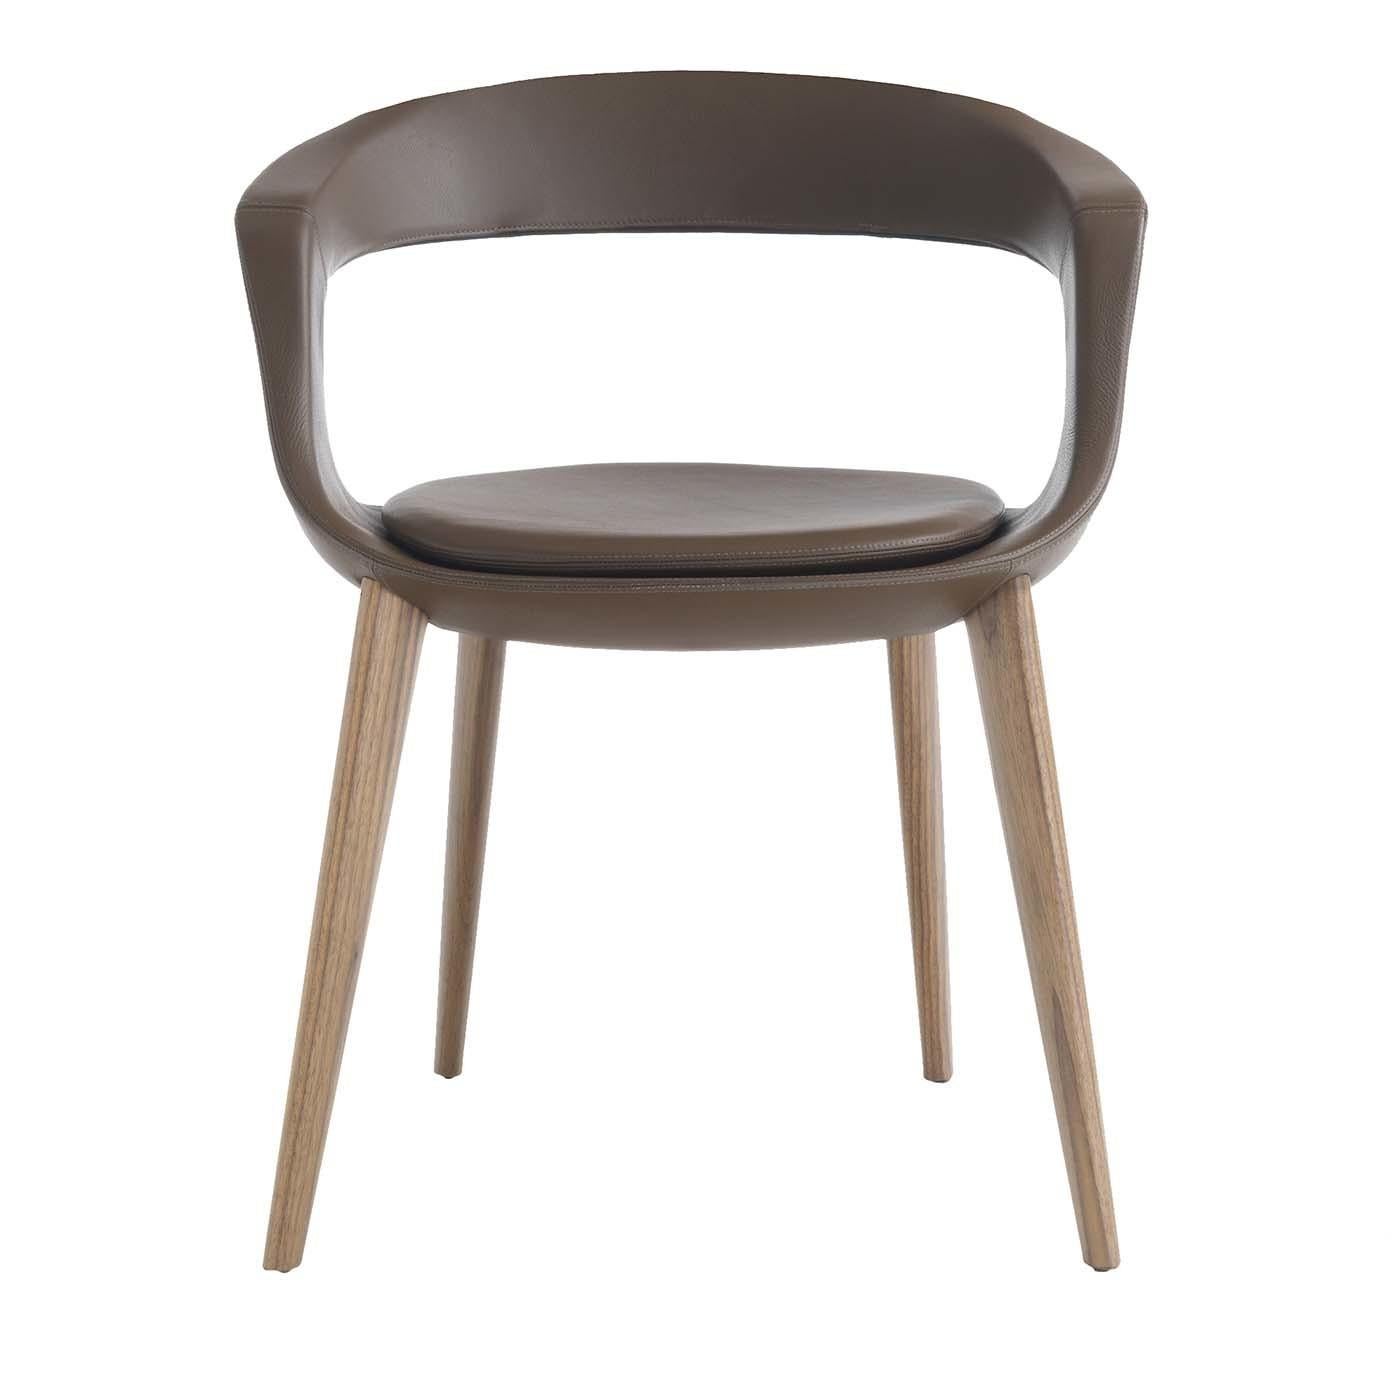 Modern Frenchkiss Low-Backed Wooden-Legged Chair by Stefano Bigi For Sale